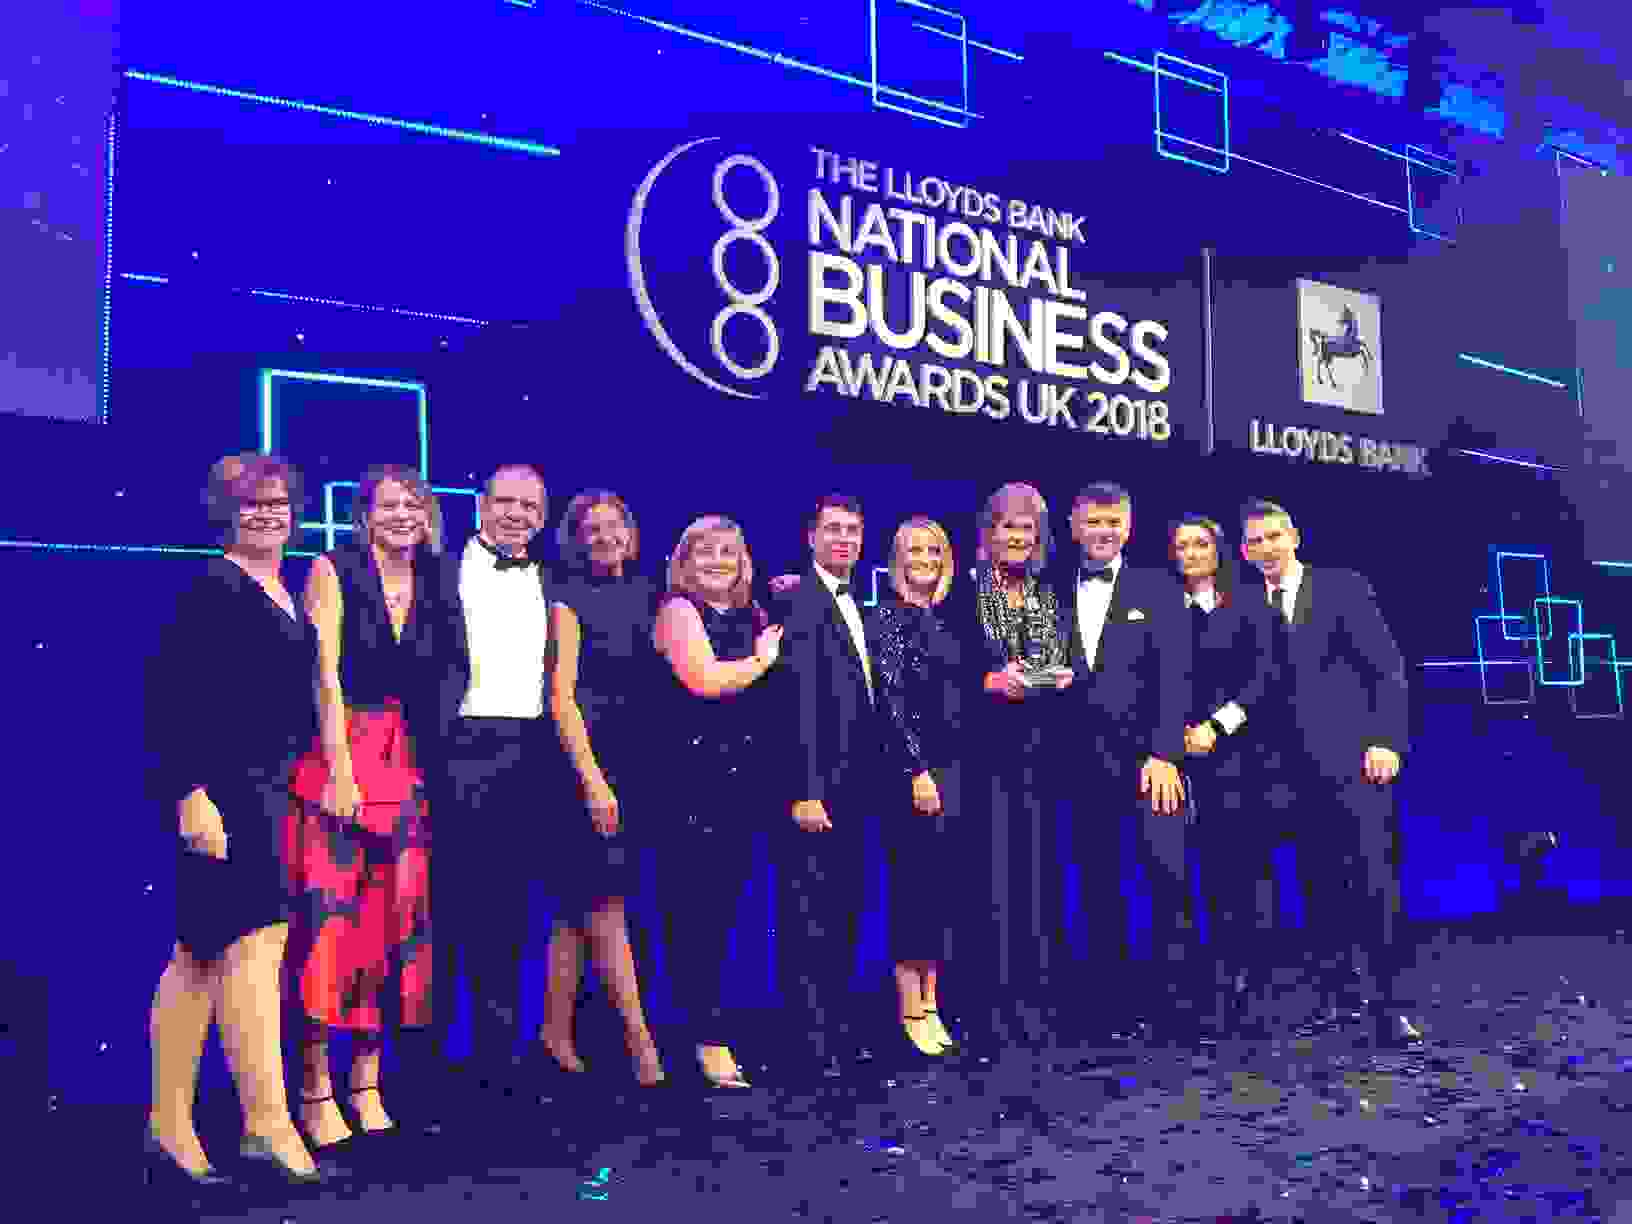 Margot Cooper, founder of Limbs & Things scoops the Lloyds Bank National Business Awards Entrepreneur of the Year 2018